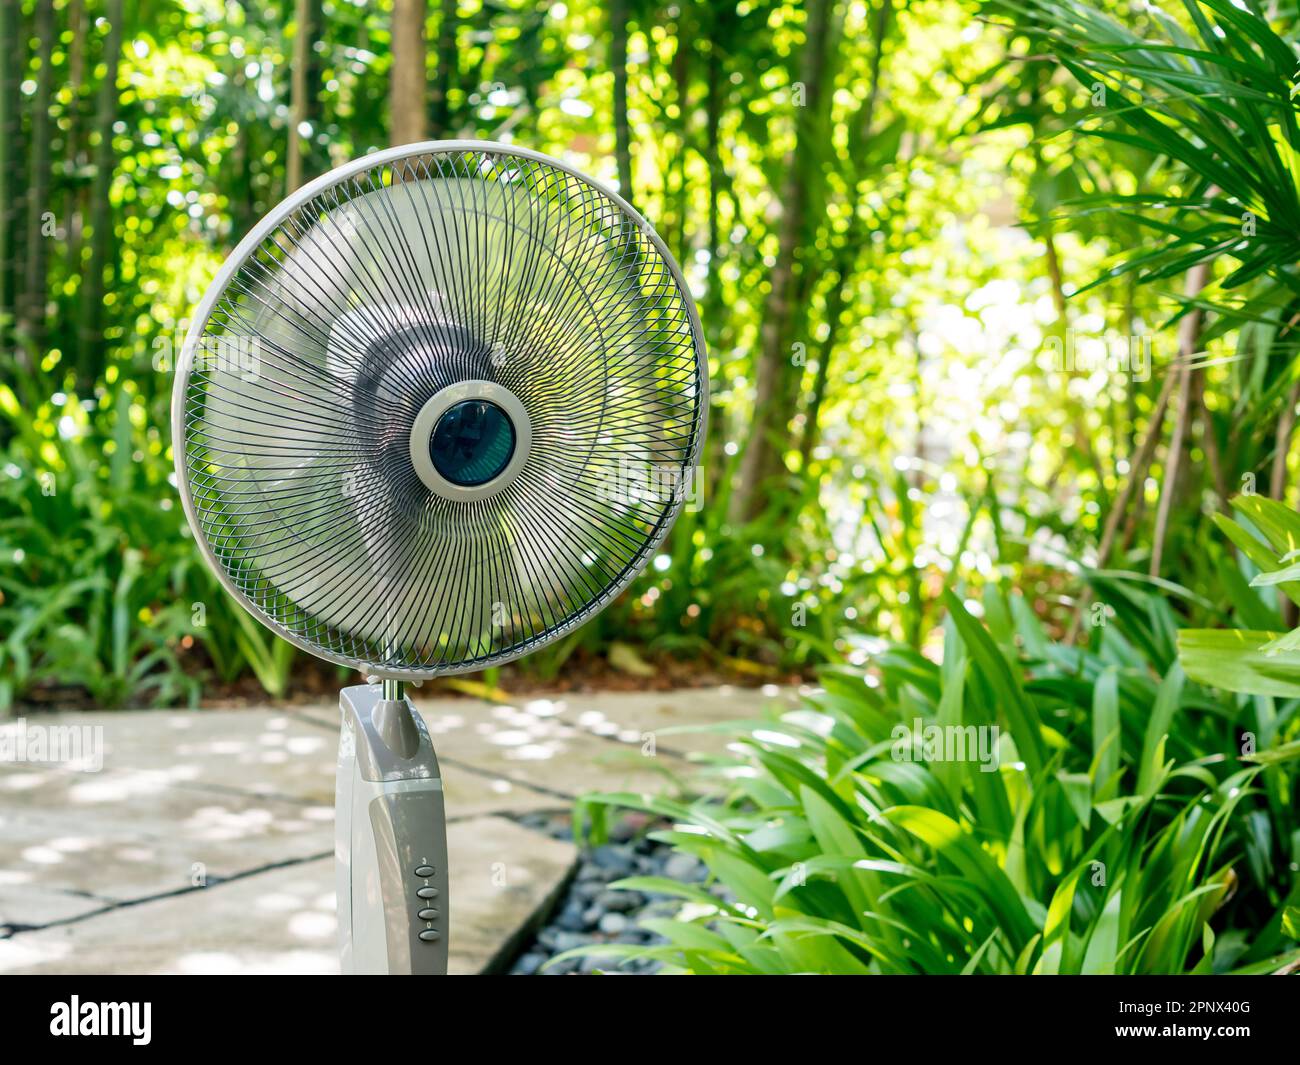 The  electric table fan in the garden Stock Photo